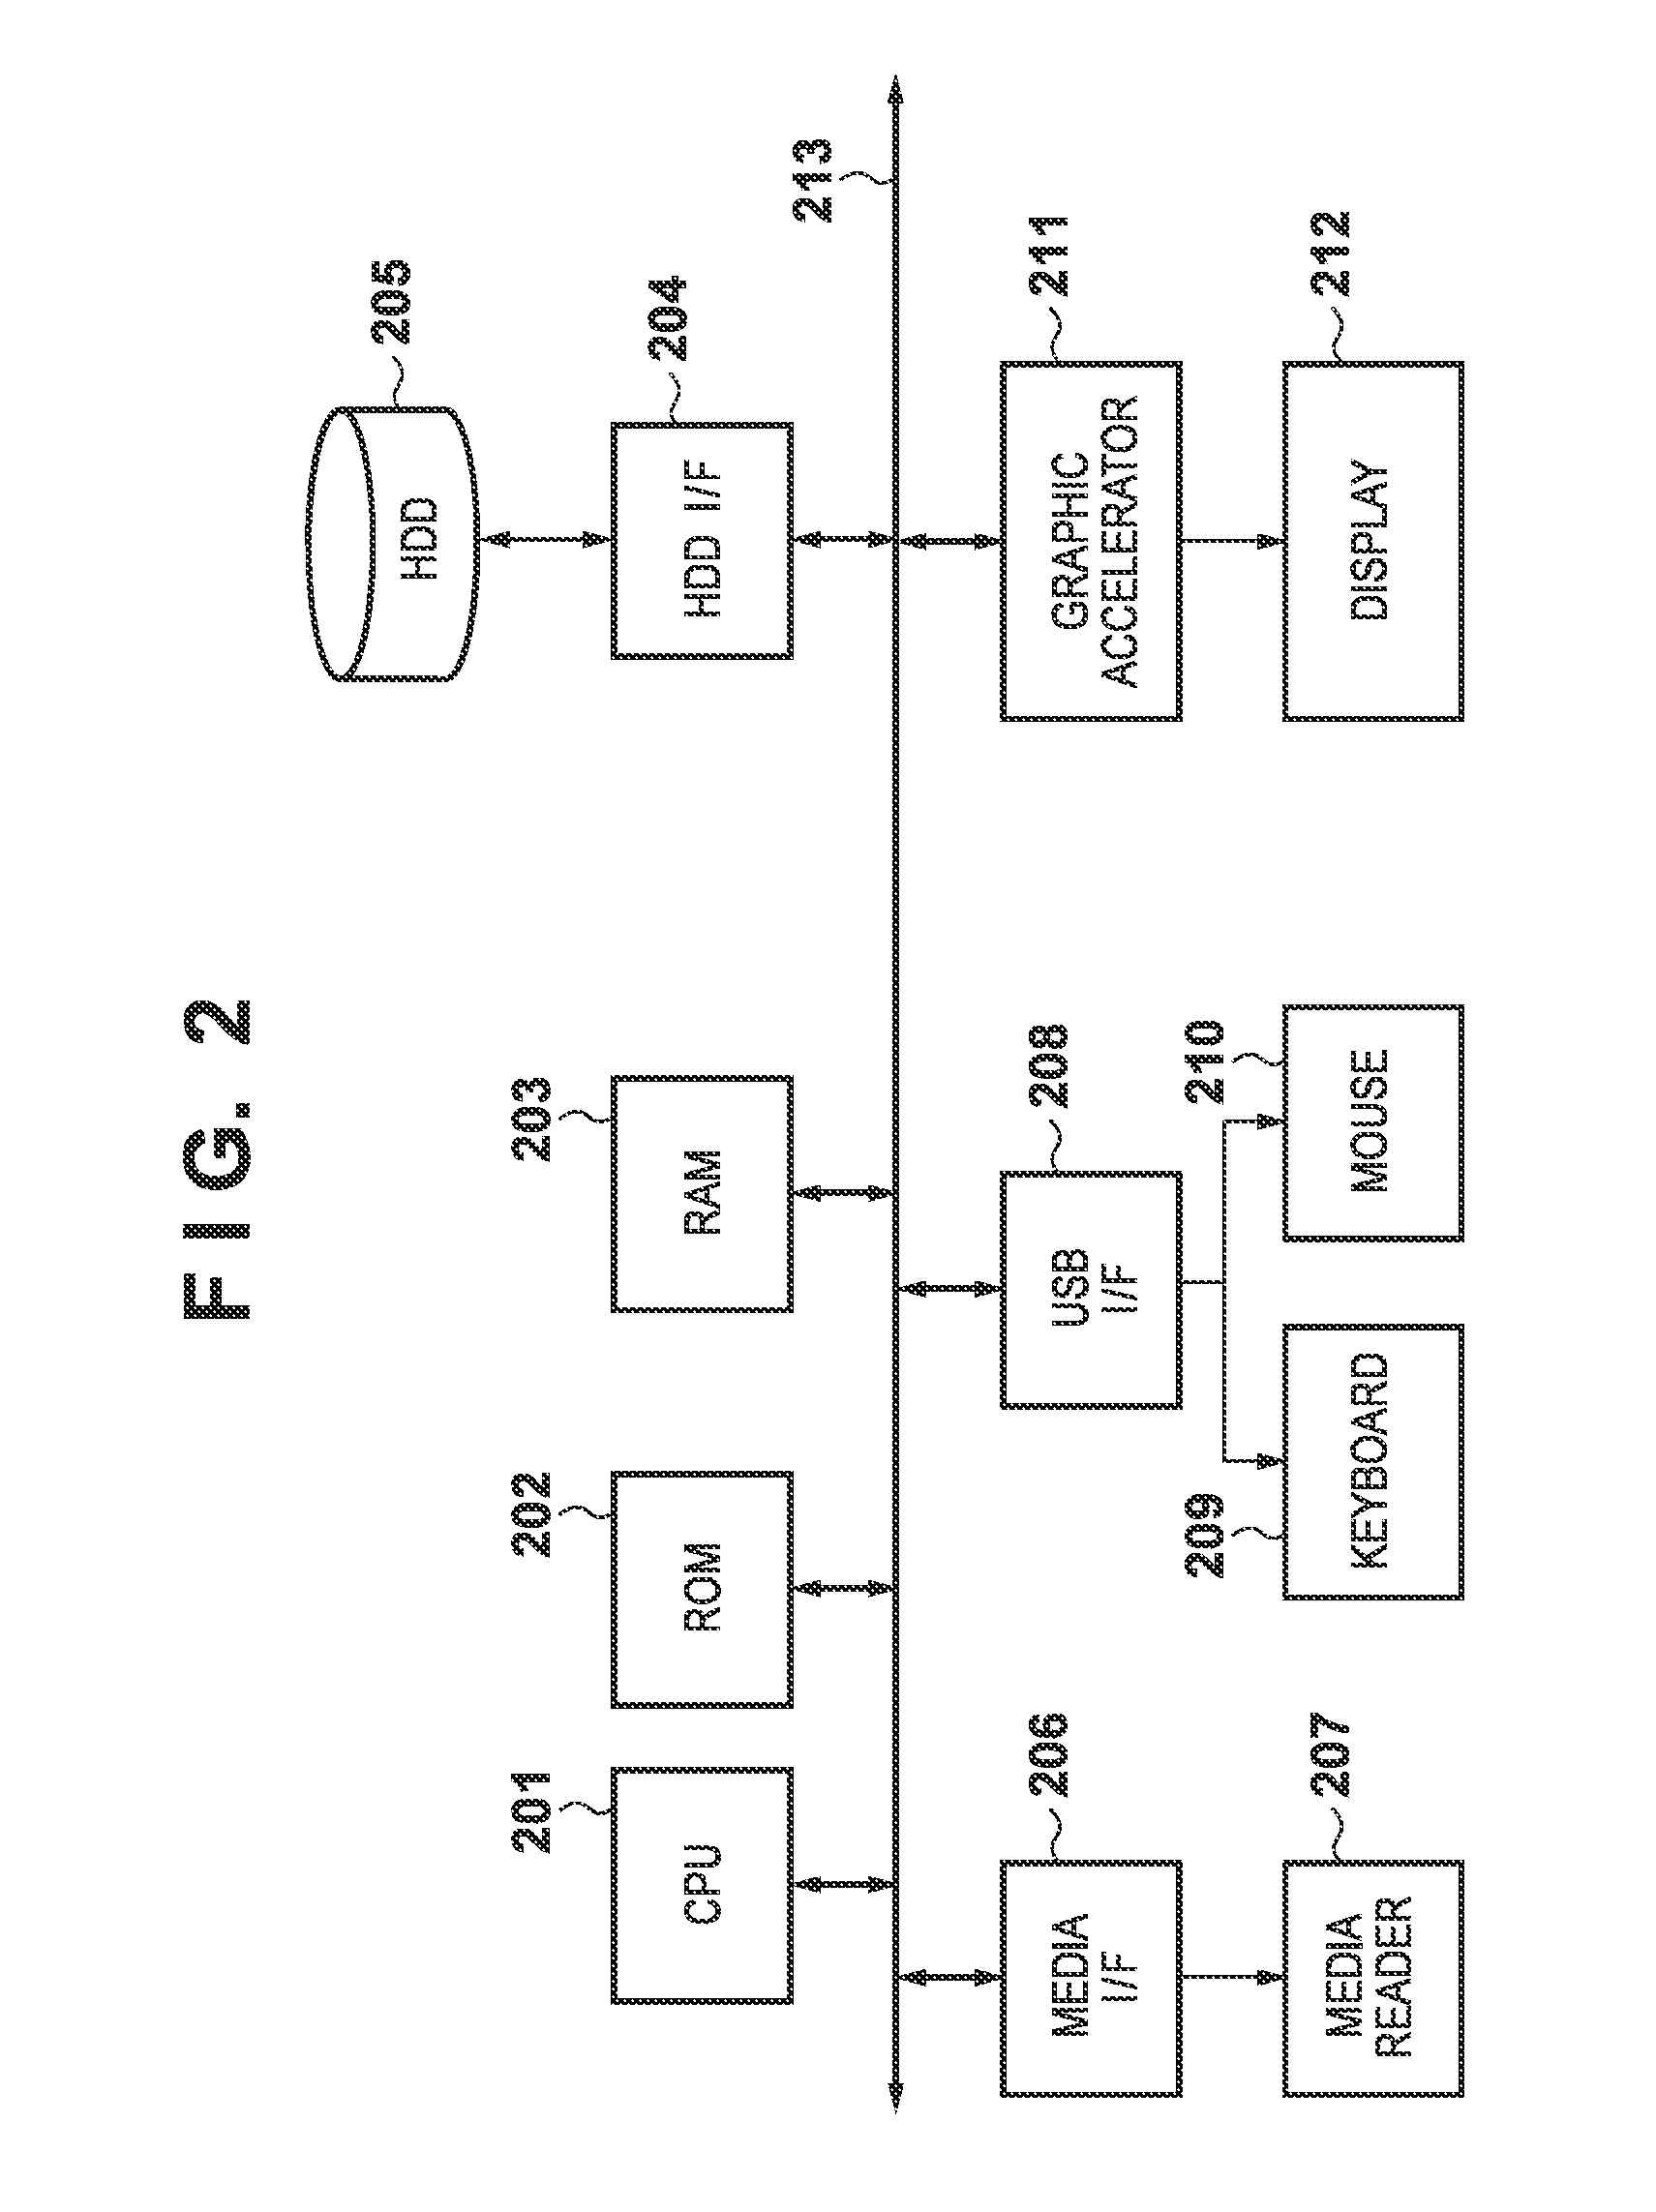 Image quality evaluation apparatus and method of controlling the same